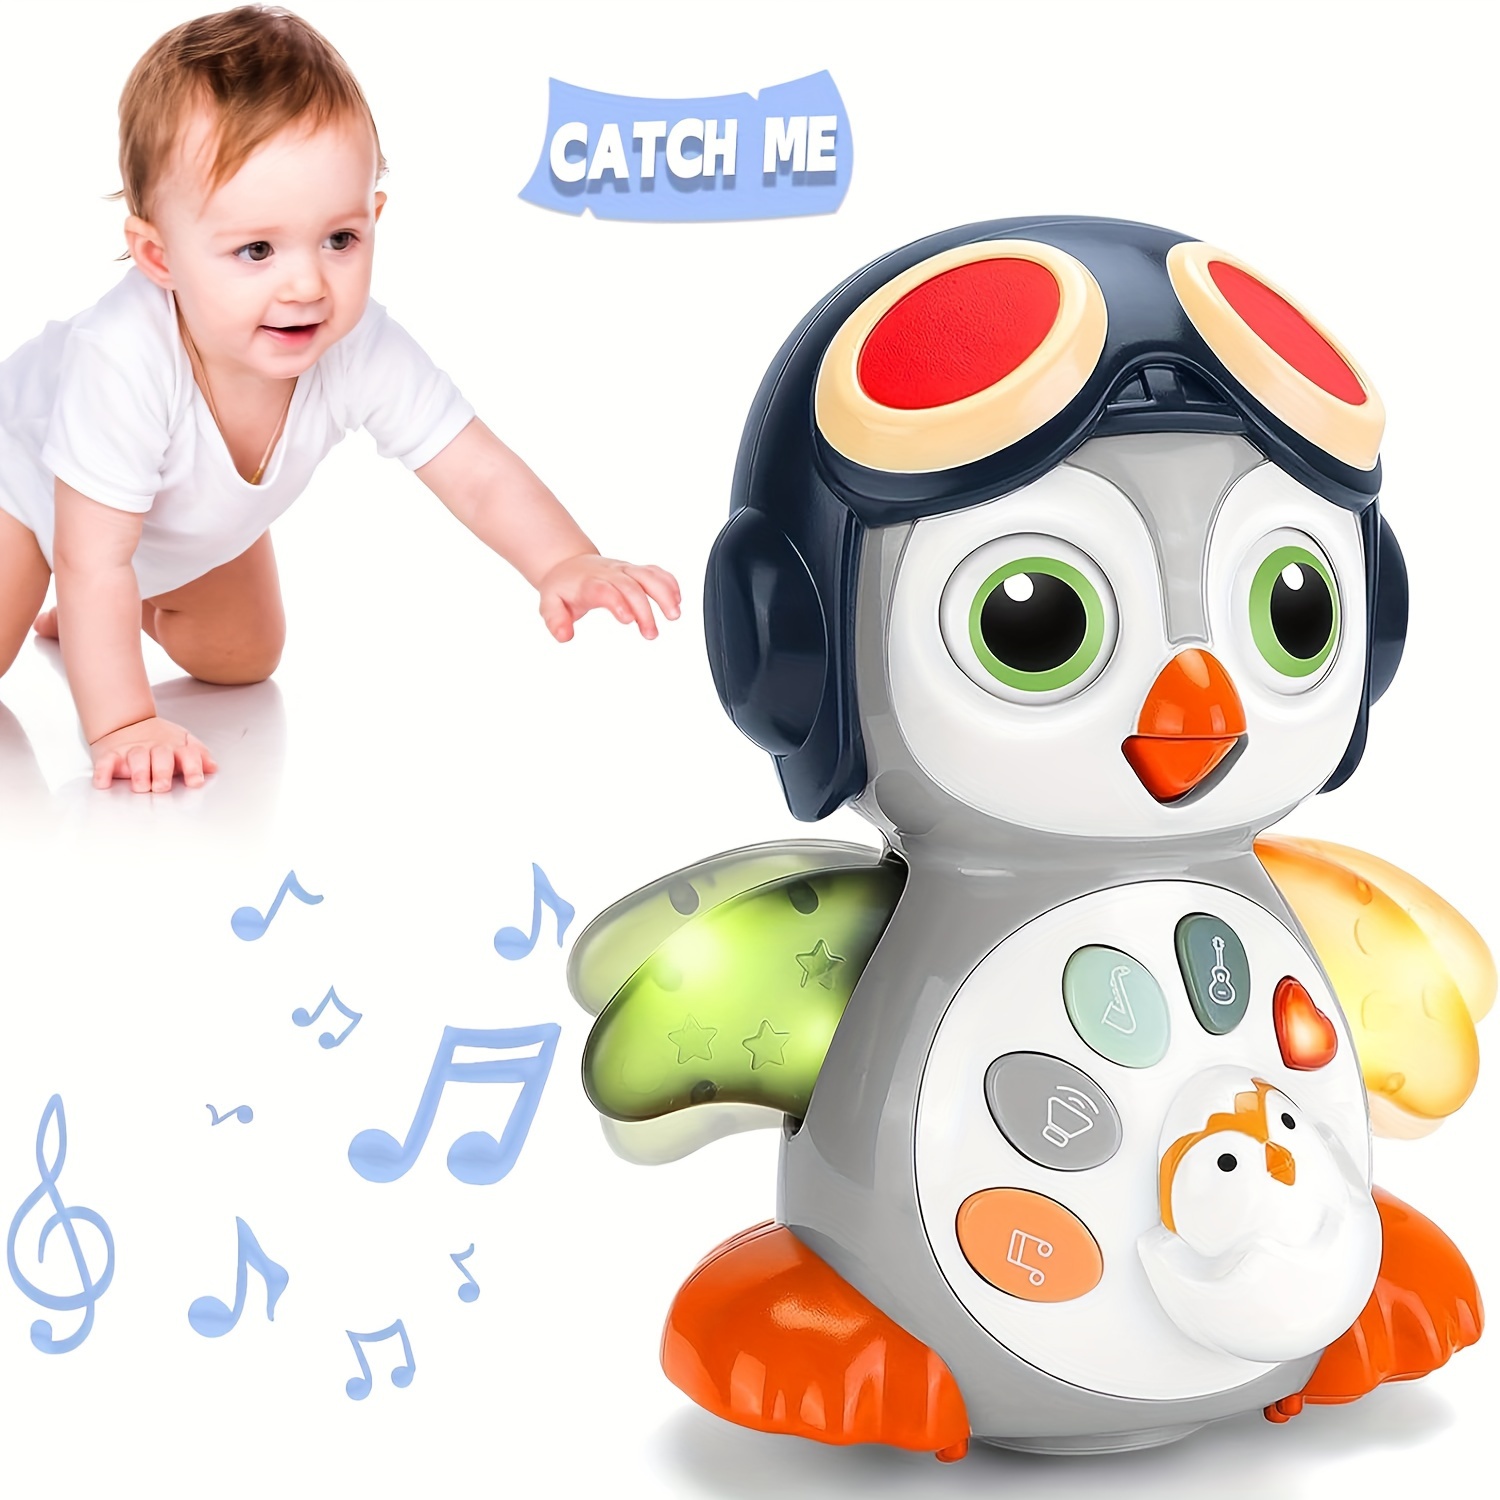 

Crawling Penguin Musical Toy, Tummy Time Toy With Music & Lights, Light Up Learning Toy, Dancing Crawling Toy, Learning To Crawl, Interactive Development Toy, Holiday Gift, Random Color